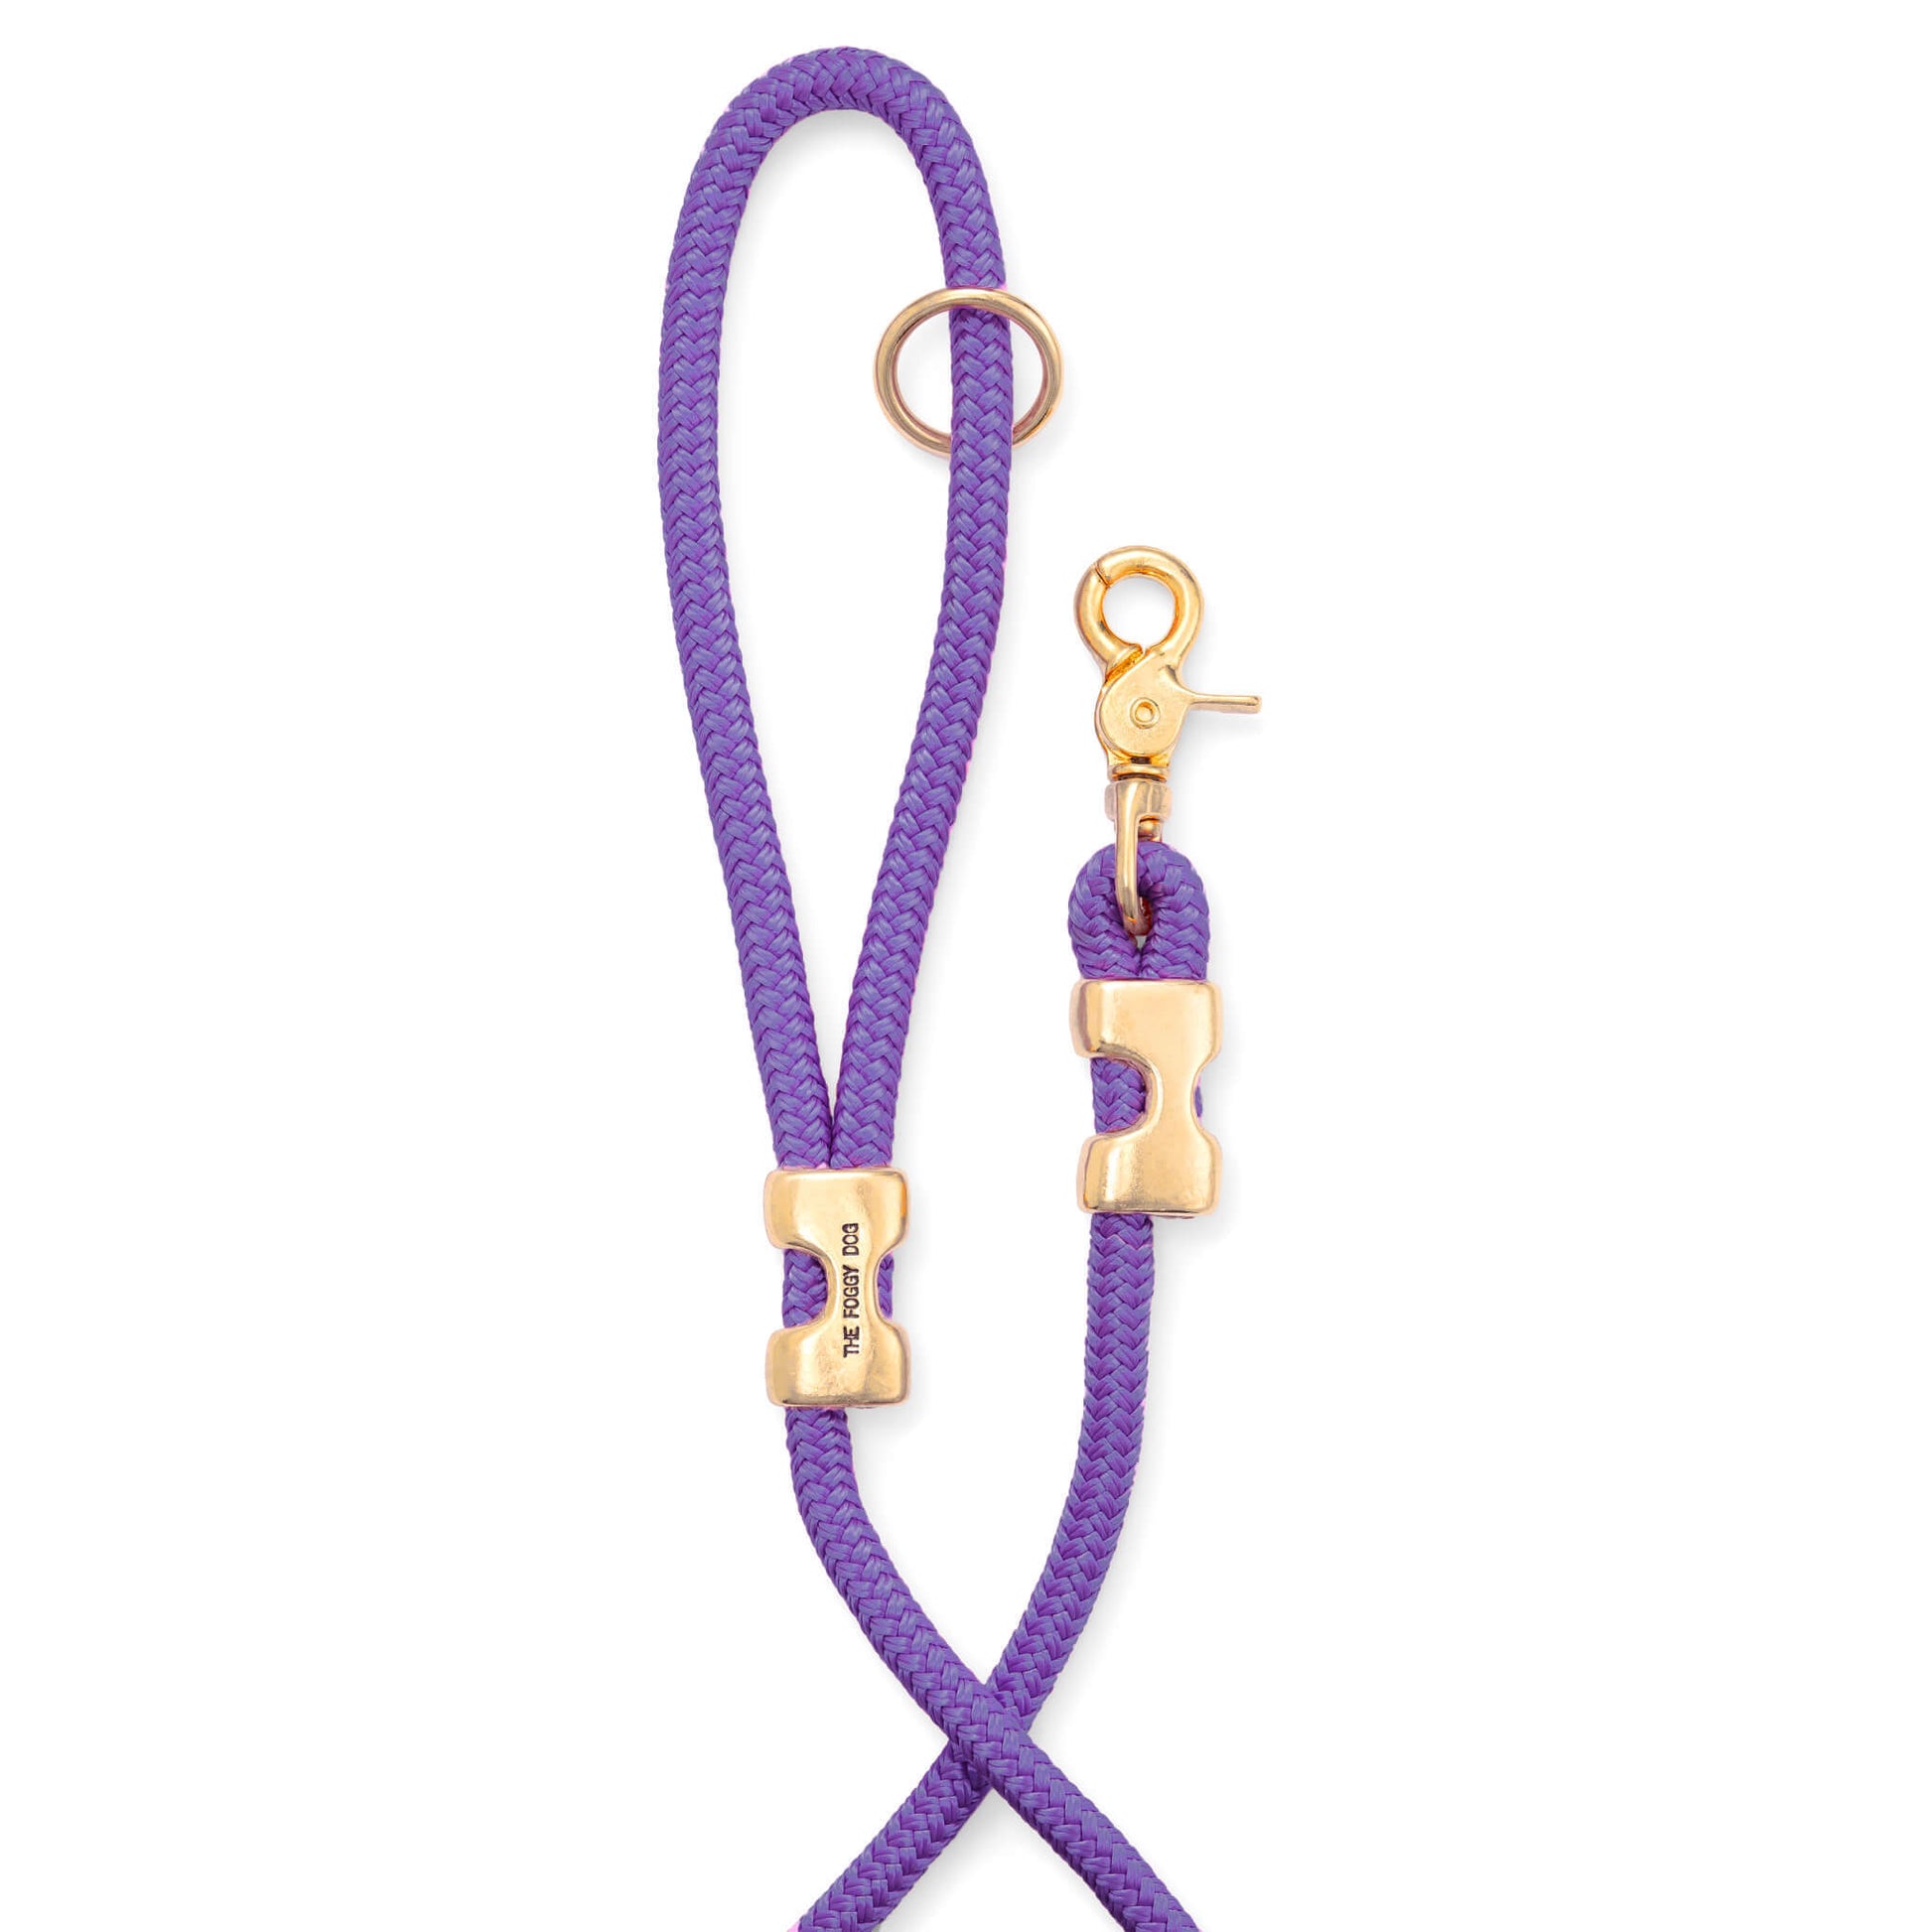 Violet Marine Rope Dog Leash from The Foggy Dog